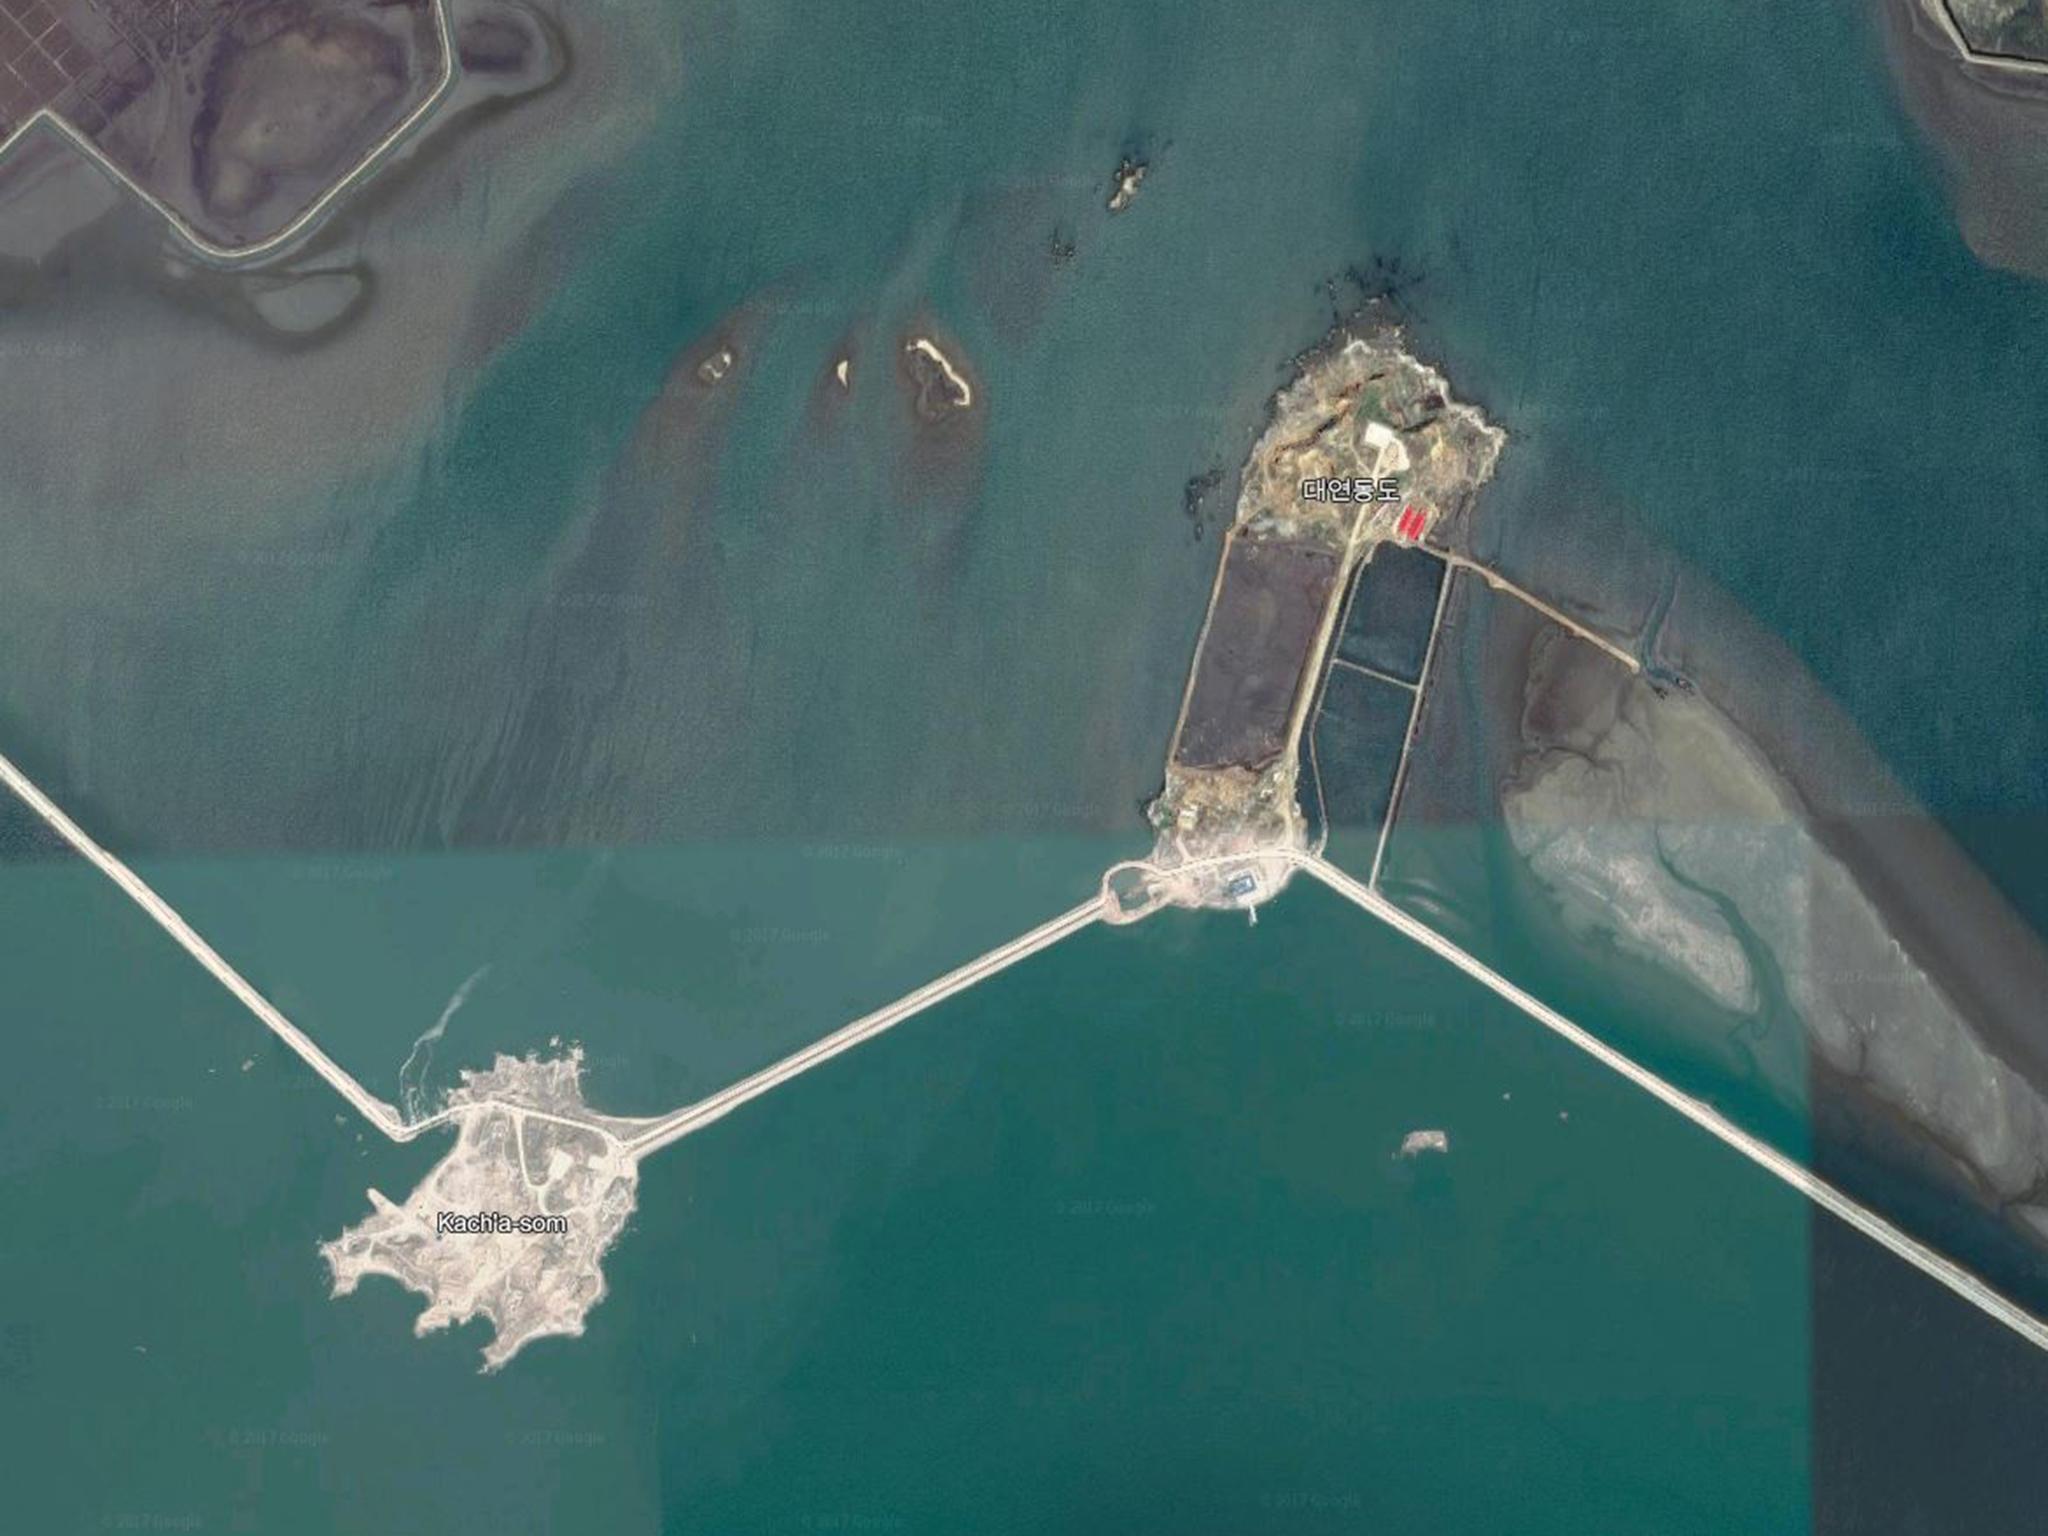 Two of the islands near the Sohae satellite launch station